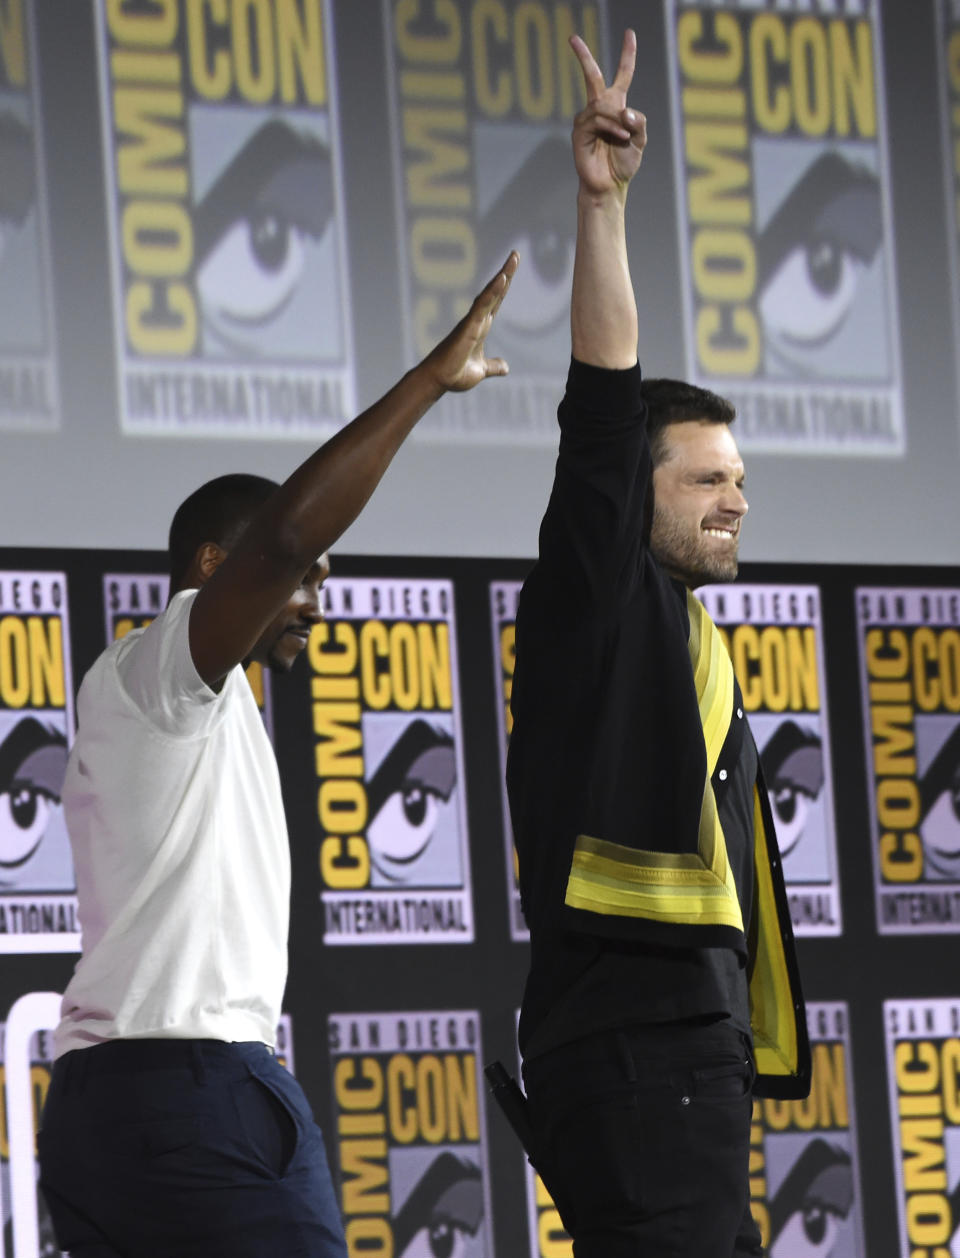 Sebastian Stan, left, and Anthony Mackie gesture to the audience at the Marvel Studios panel on day three of Comic-Con International on Saturday, July 20, 2019, in San Diego. (Photo by Chris Pizzello/Invision/AP)